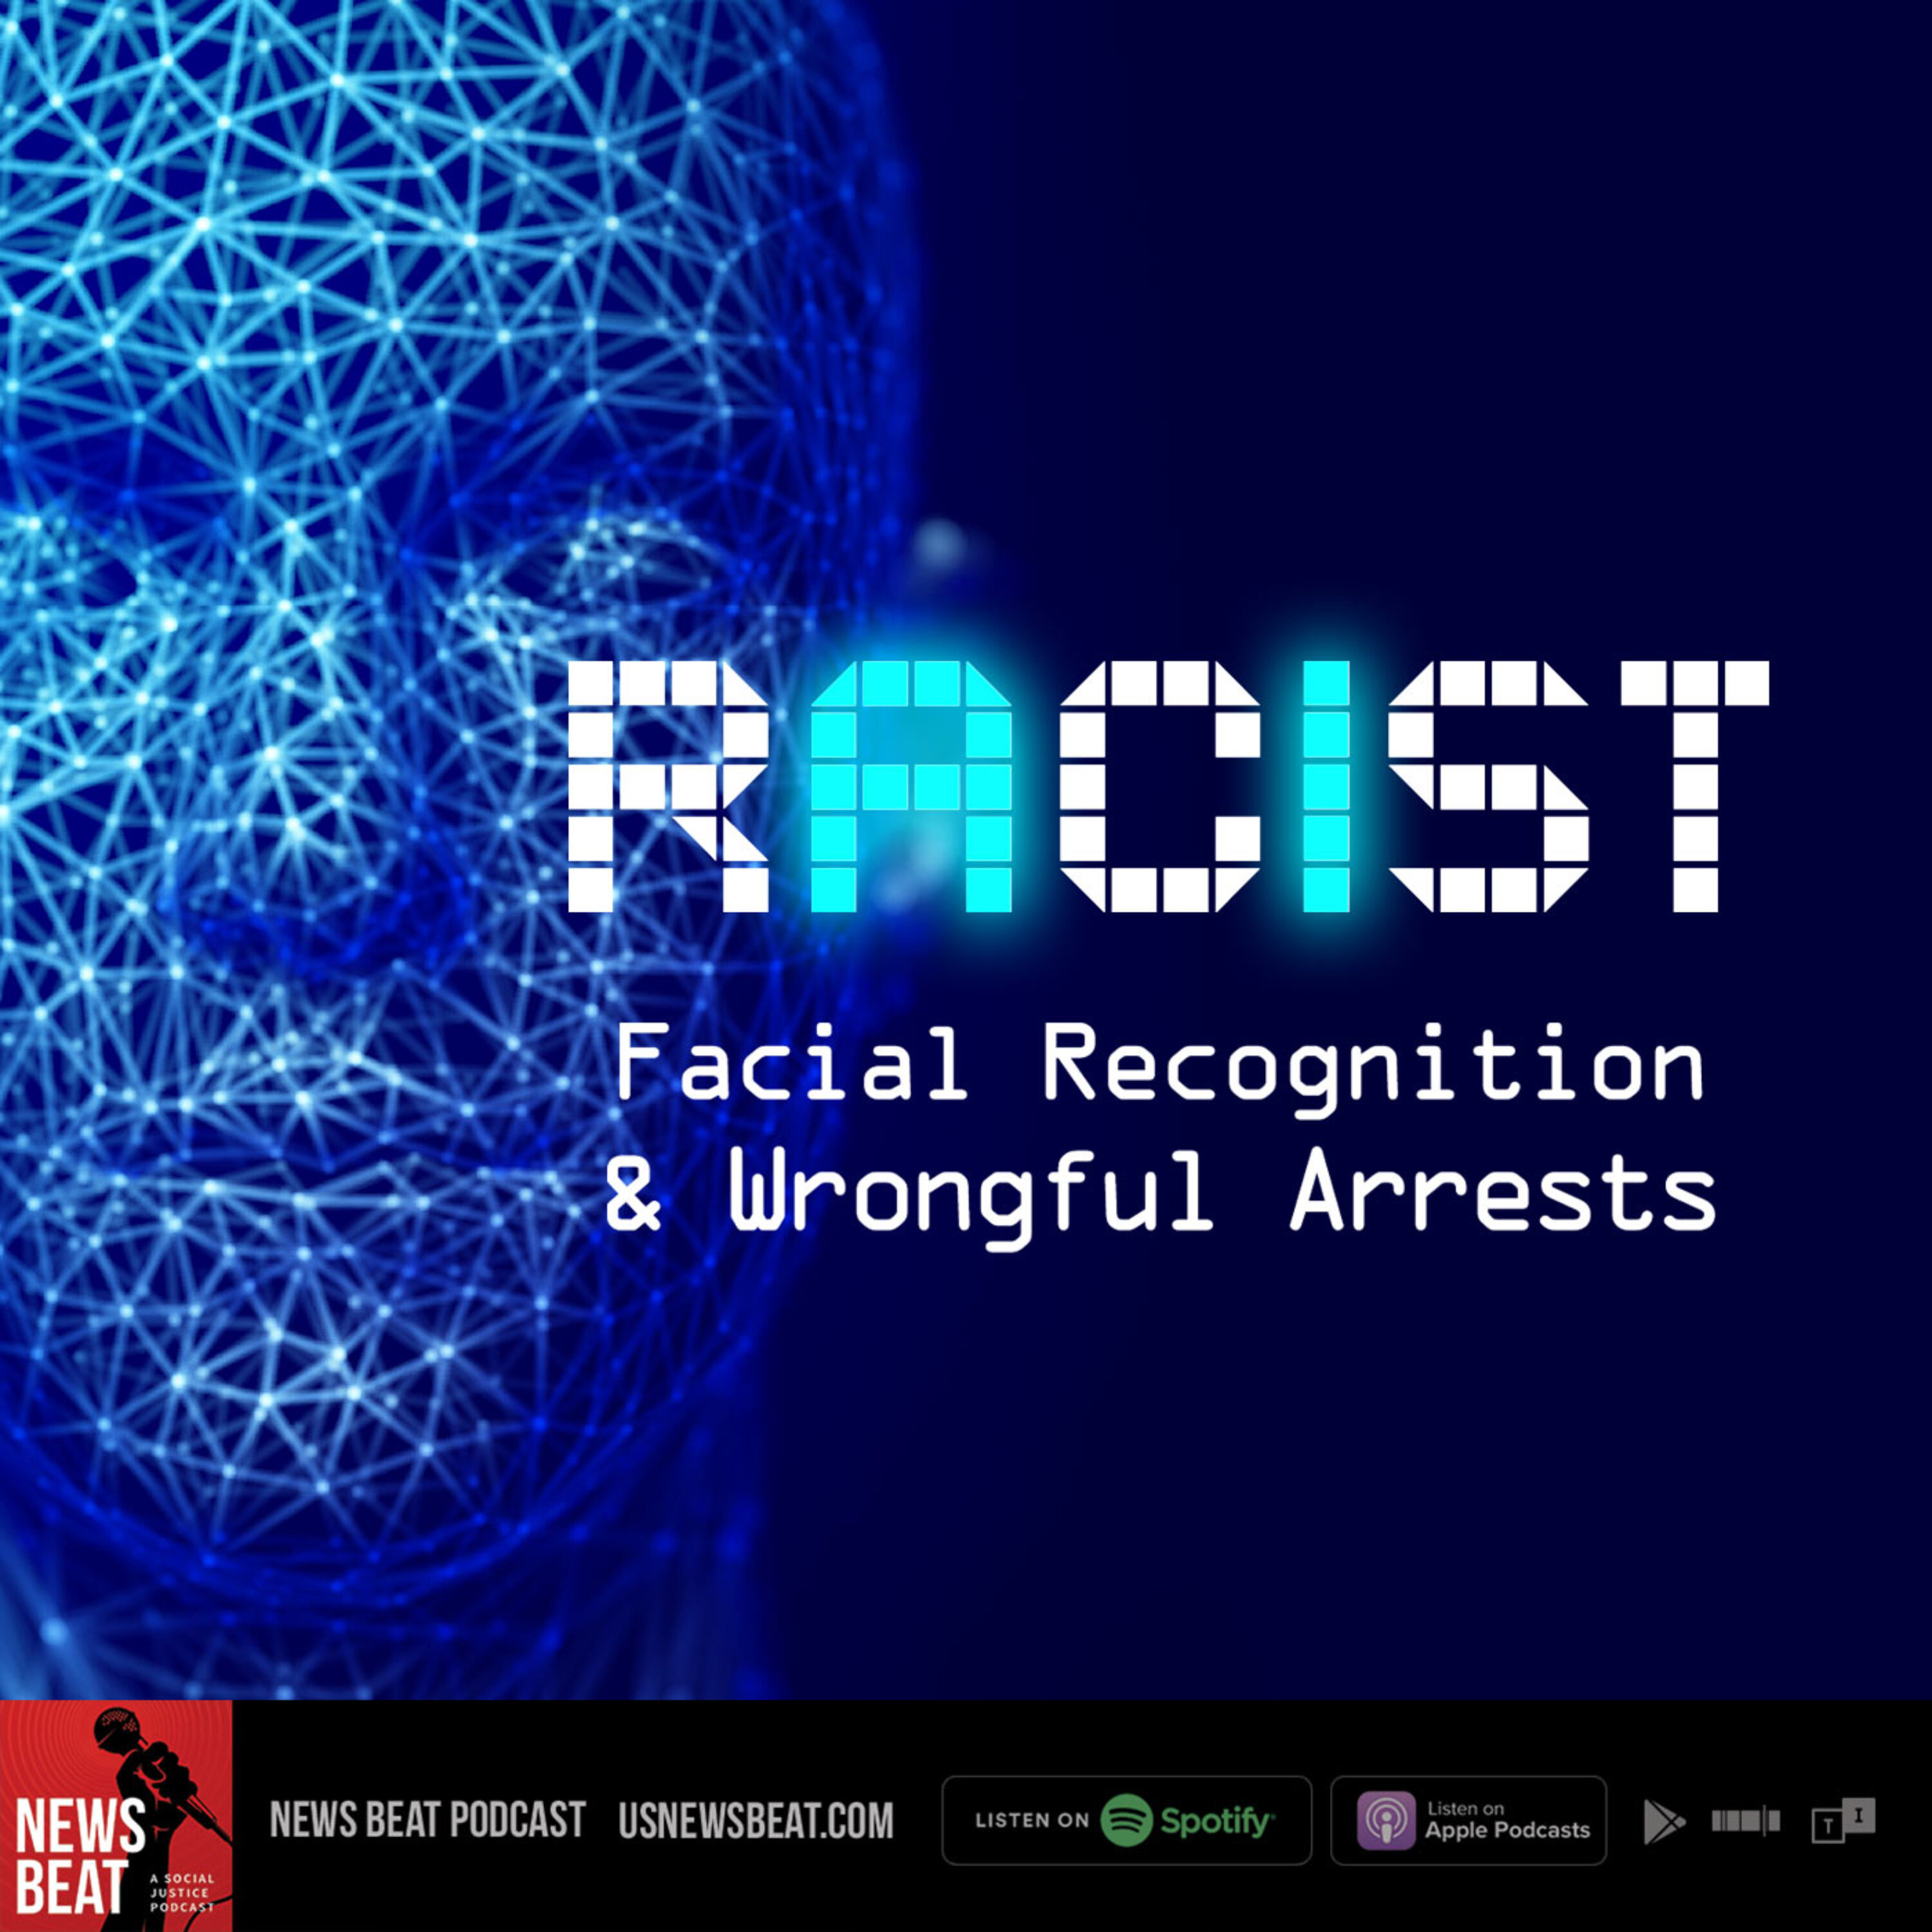 RACIST AI: Facial Recognition & Wrongful Arrests